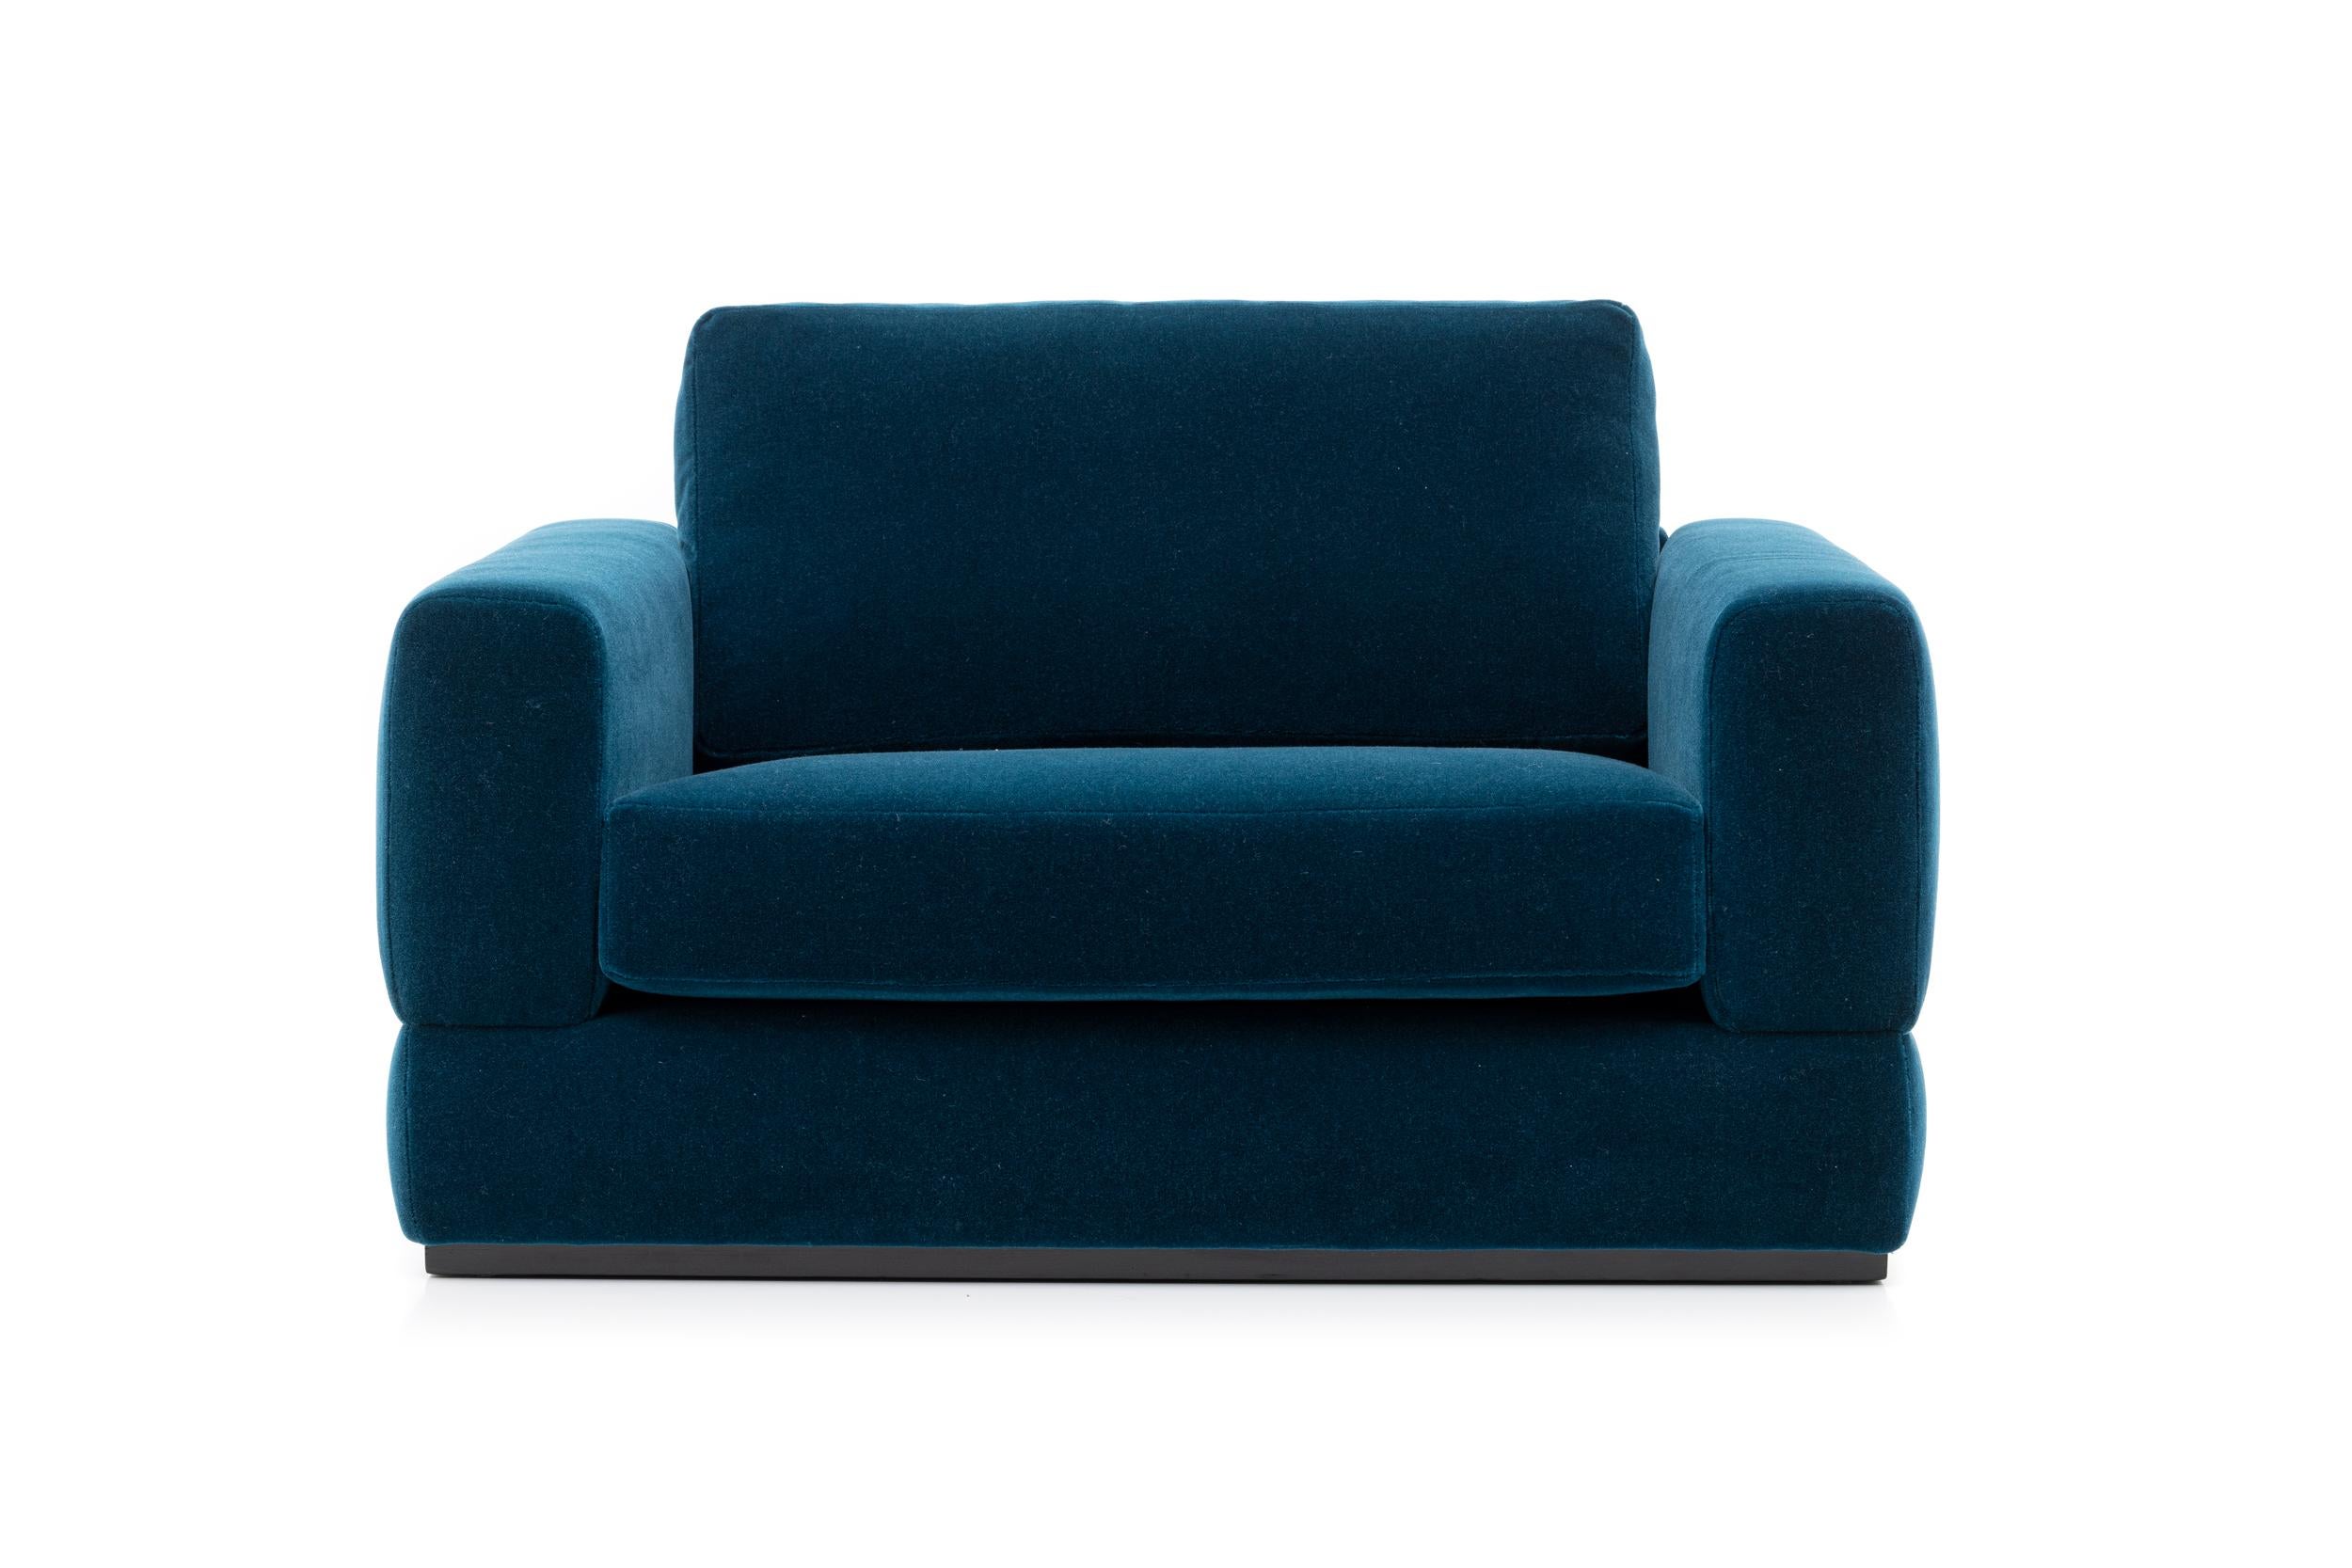 Single sofa upholstered in blue velvet.

An original design by the Architecture & Interior Design Studio Ding Dong. The Ibiza single sofa is upholstered in Pierre Frey Mohair fabric.

Comfortable yet stylish and with beautiful details, the Ibiza is